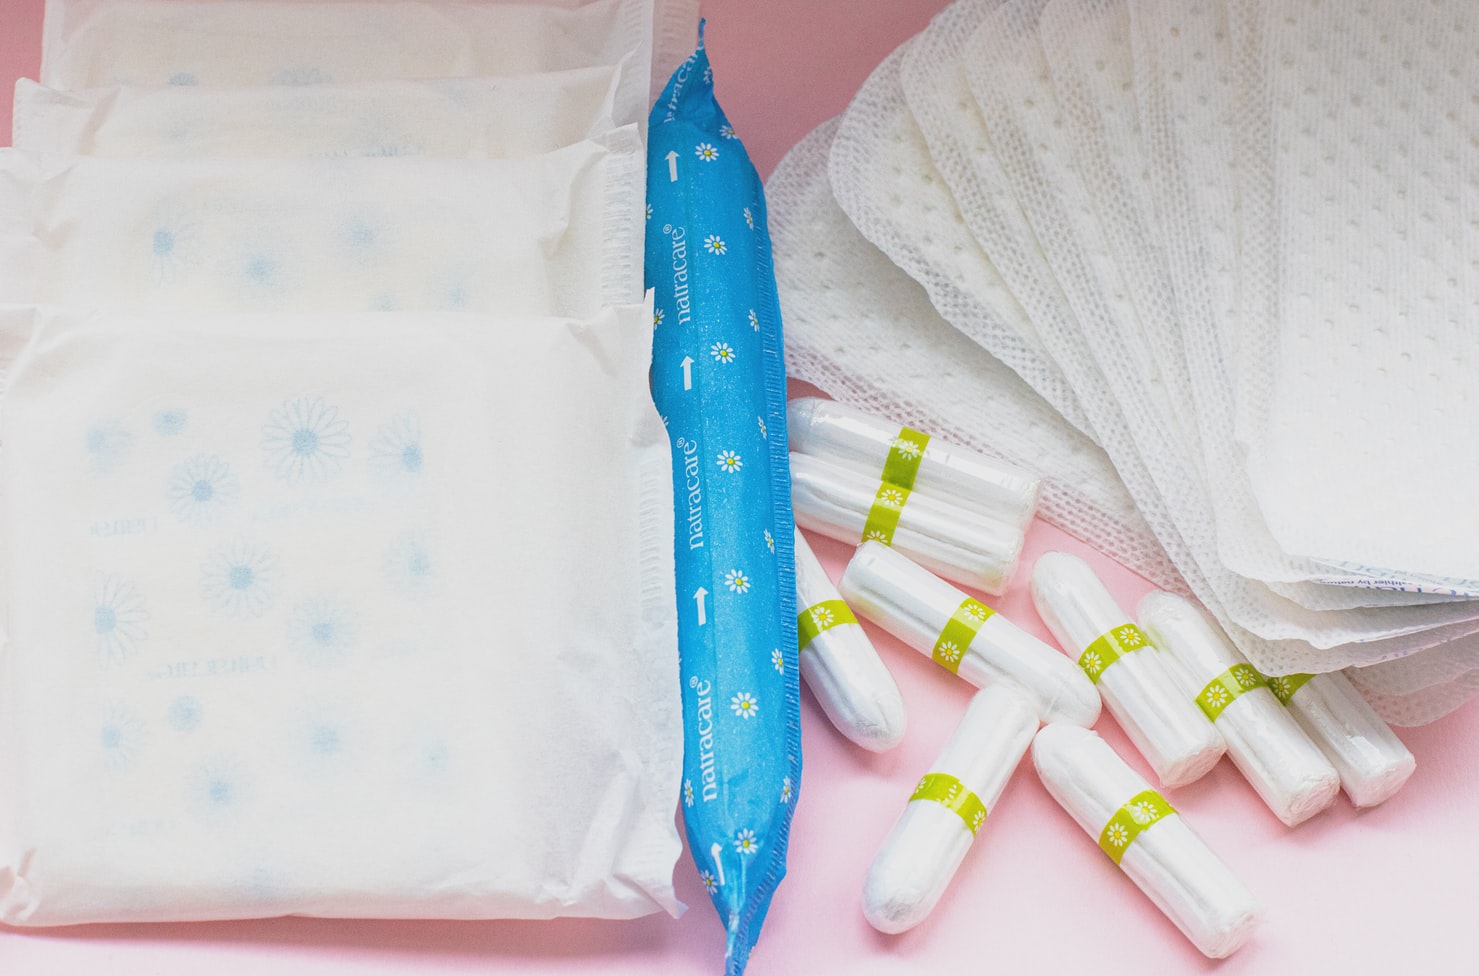 Tips for Buying Overnight Menstrual Pads